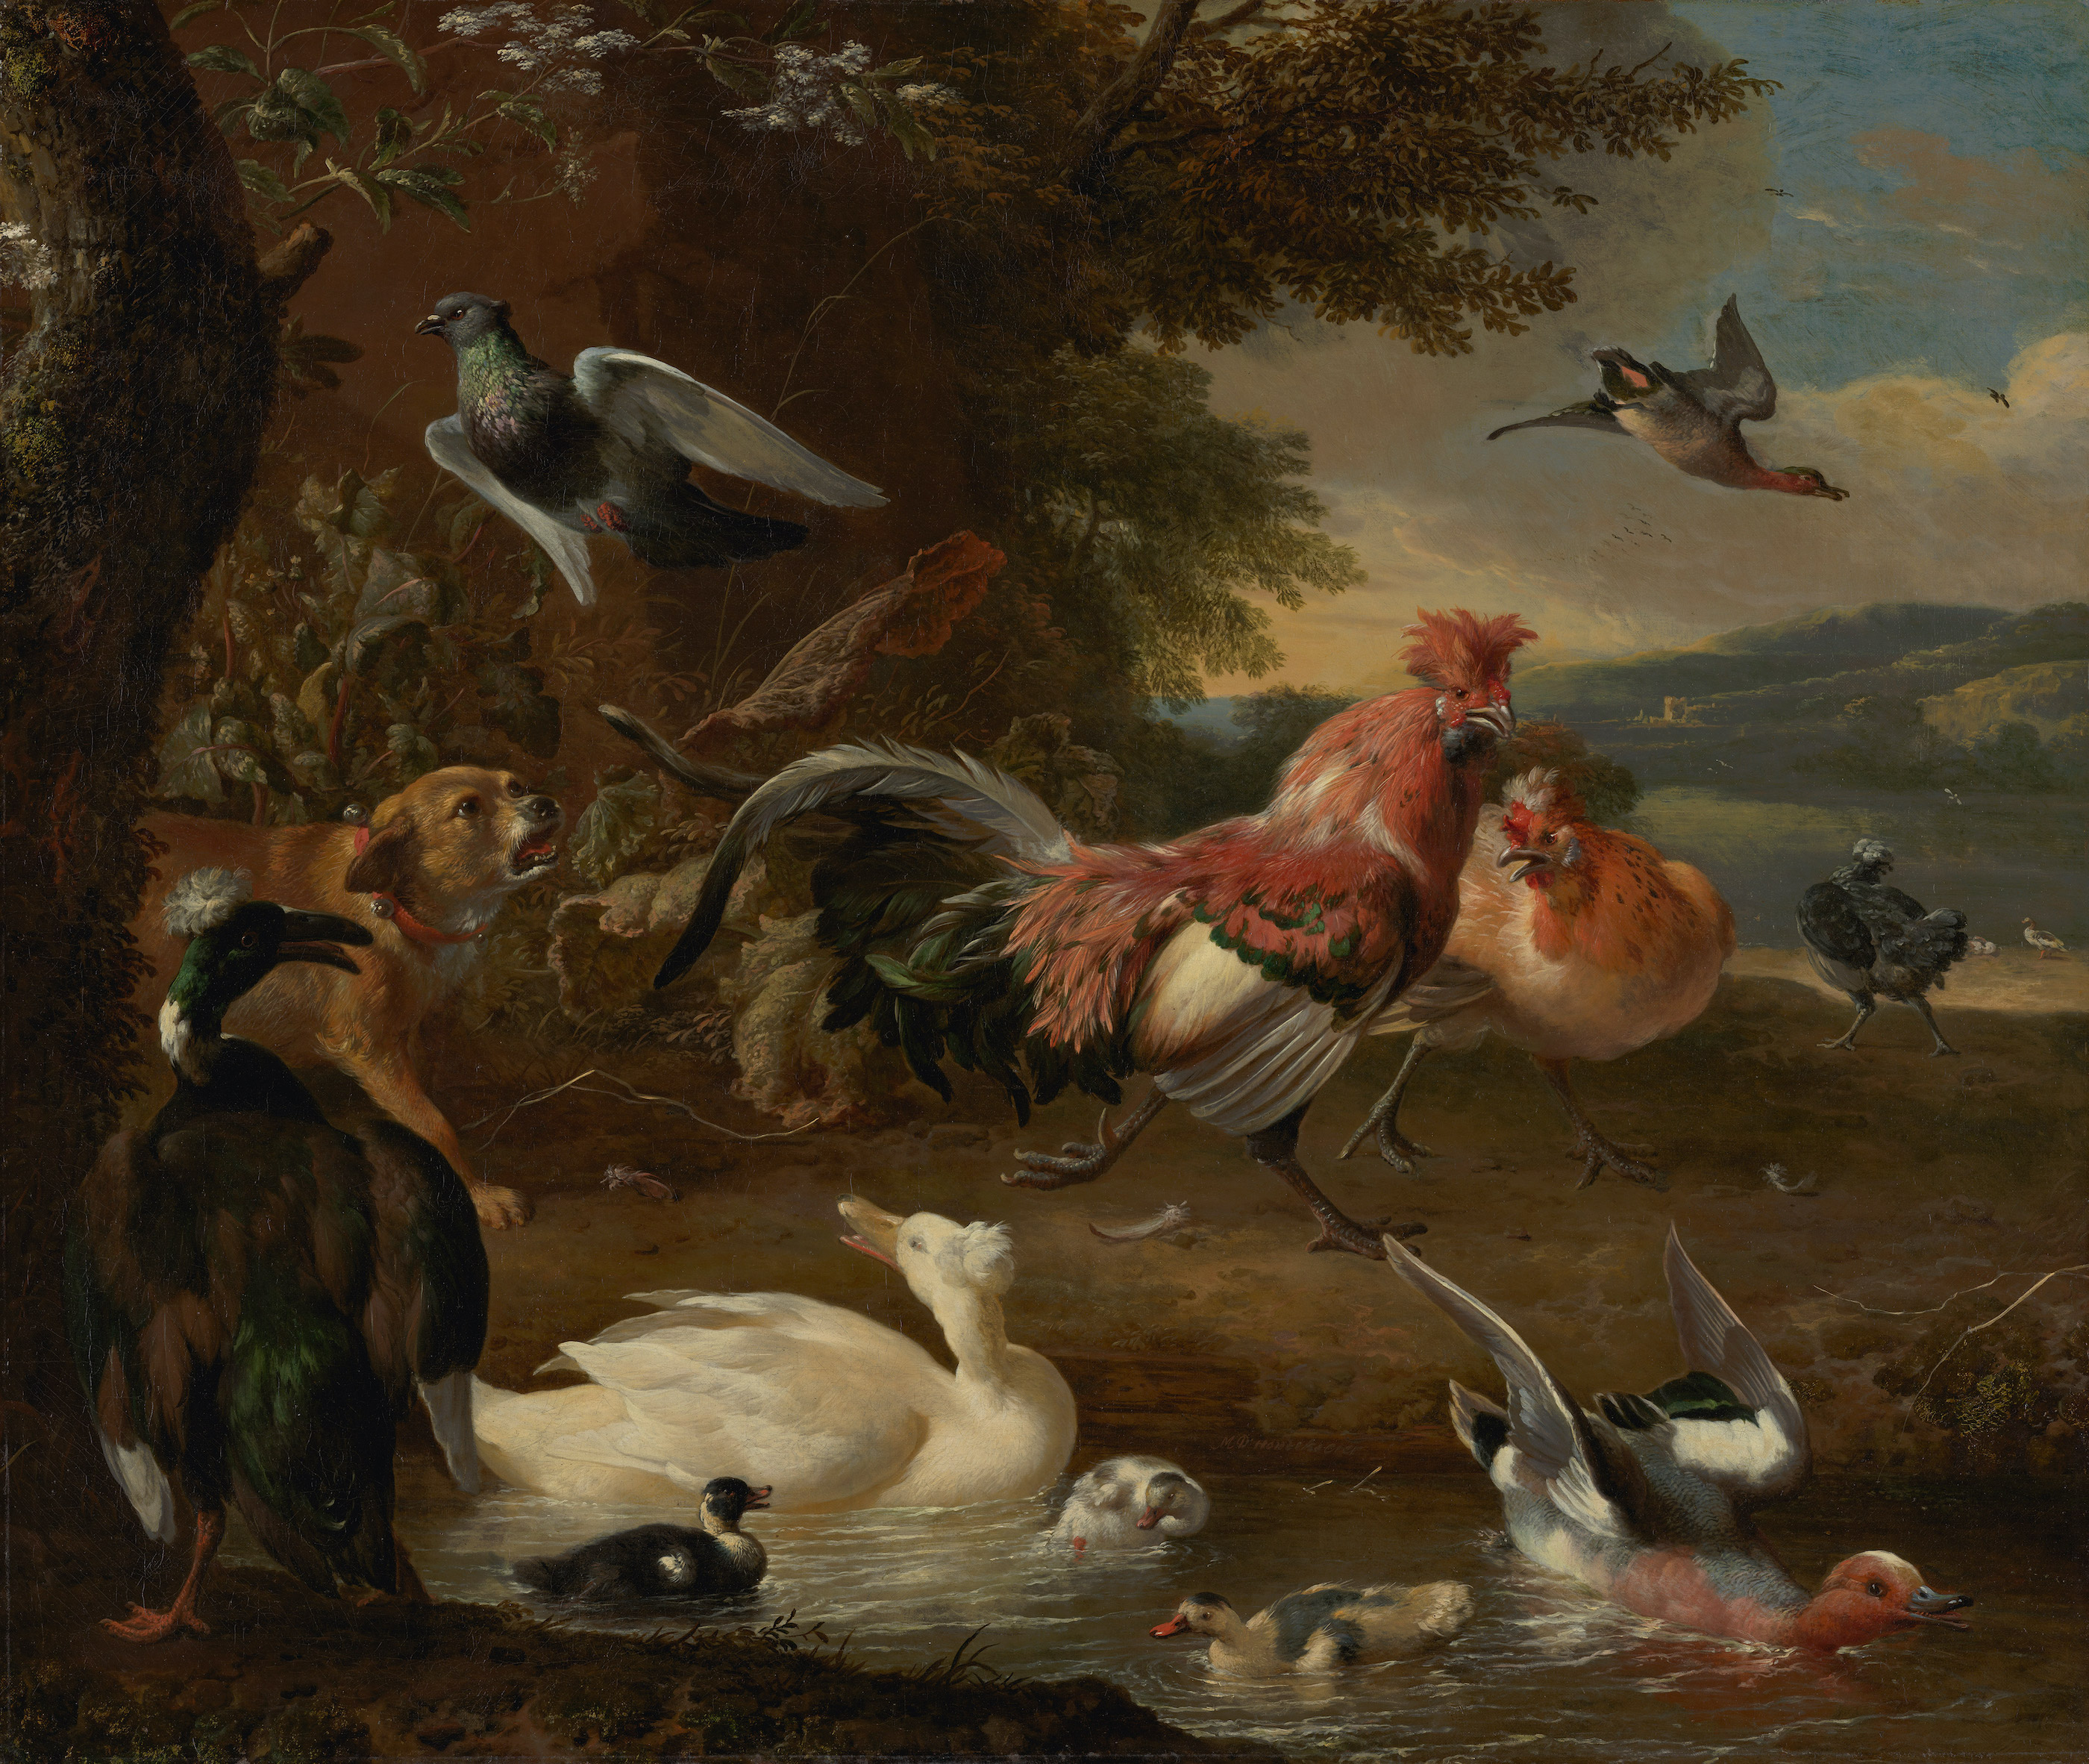 Chickens and Ducks by Melchior d' Hondecoeter - 1680 - 136 x 115 cm Mauritshuis, The Hague